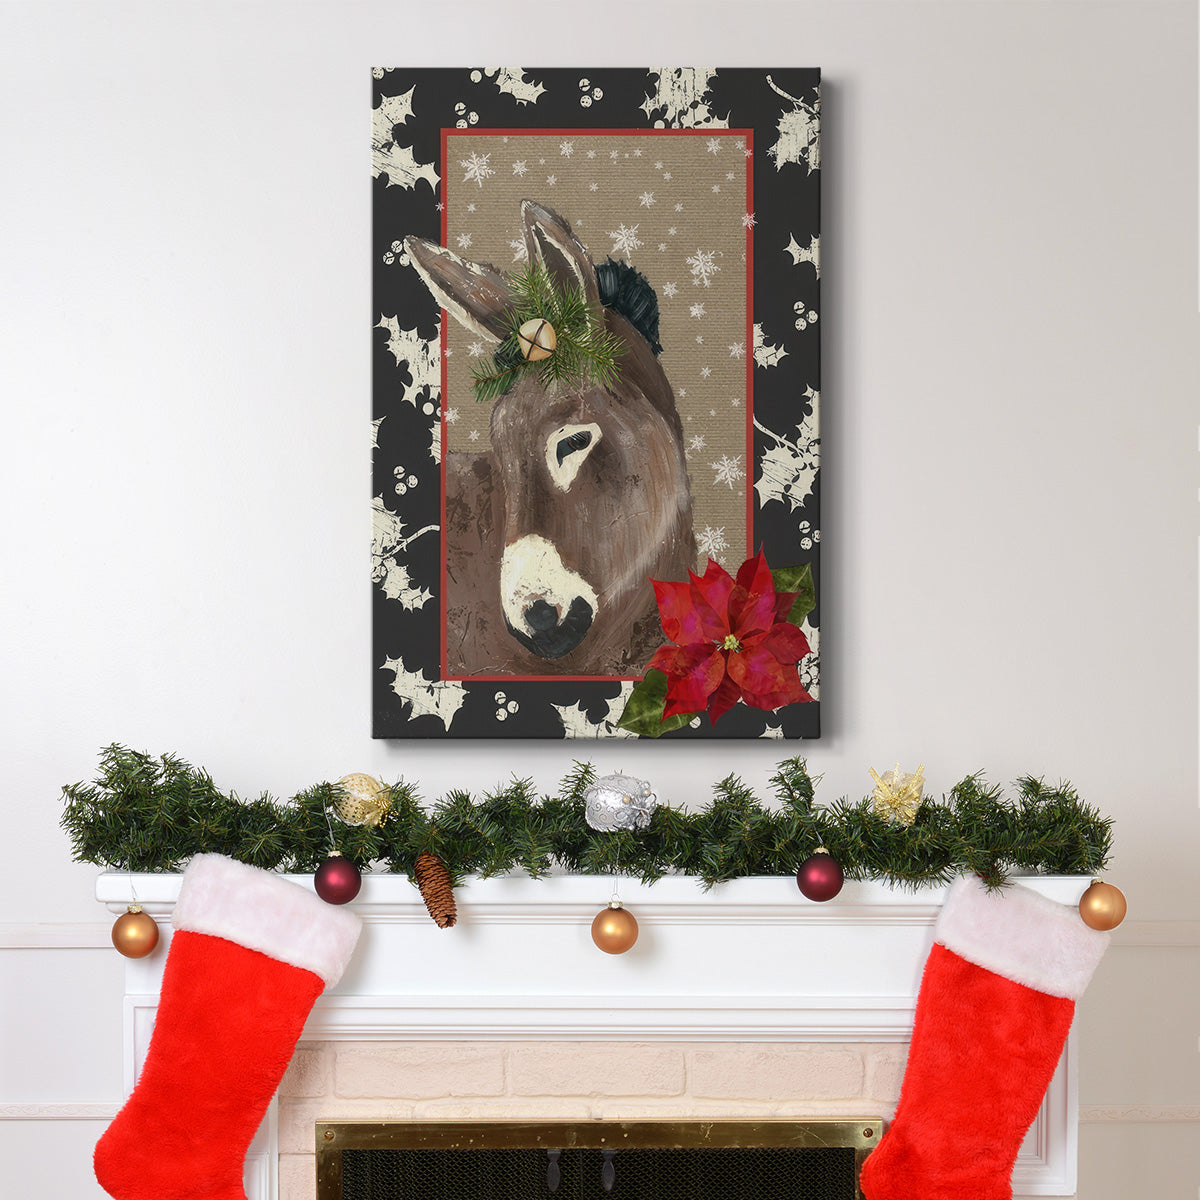 County Christmas Farm III - Gallery Wrapped Canvas